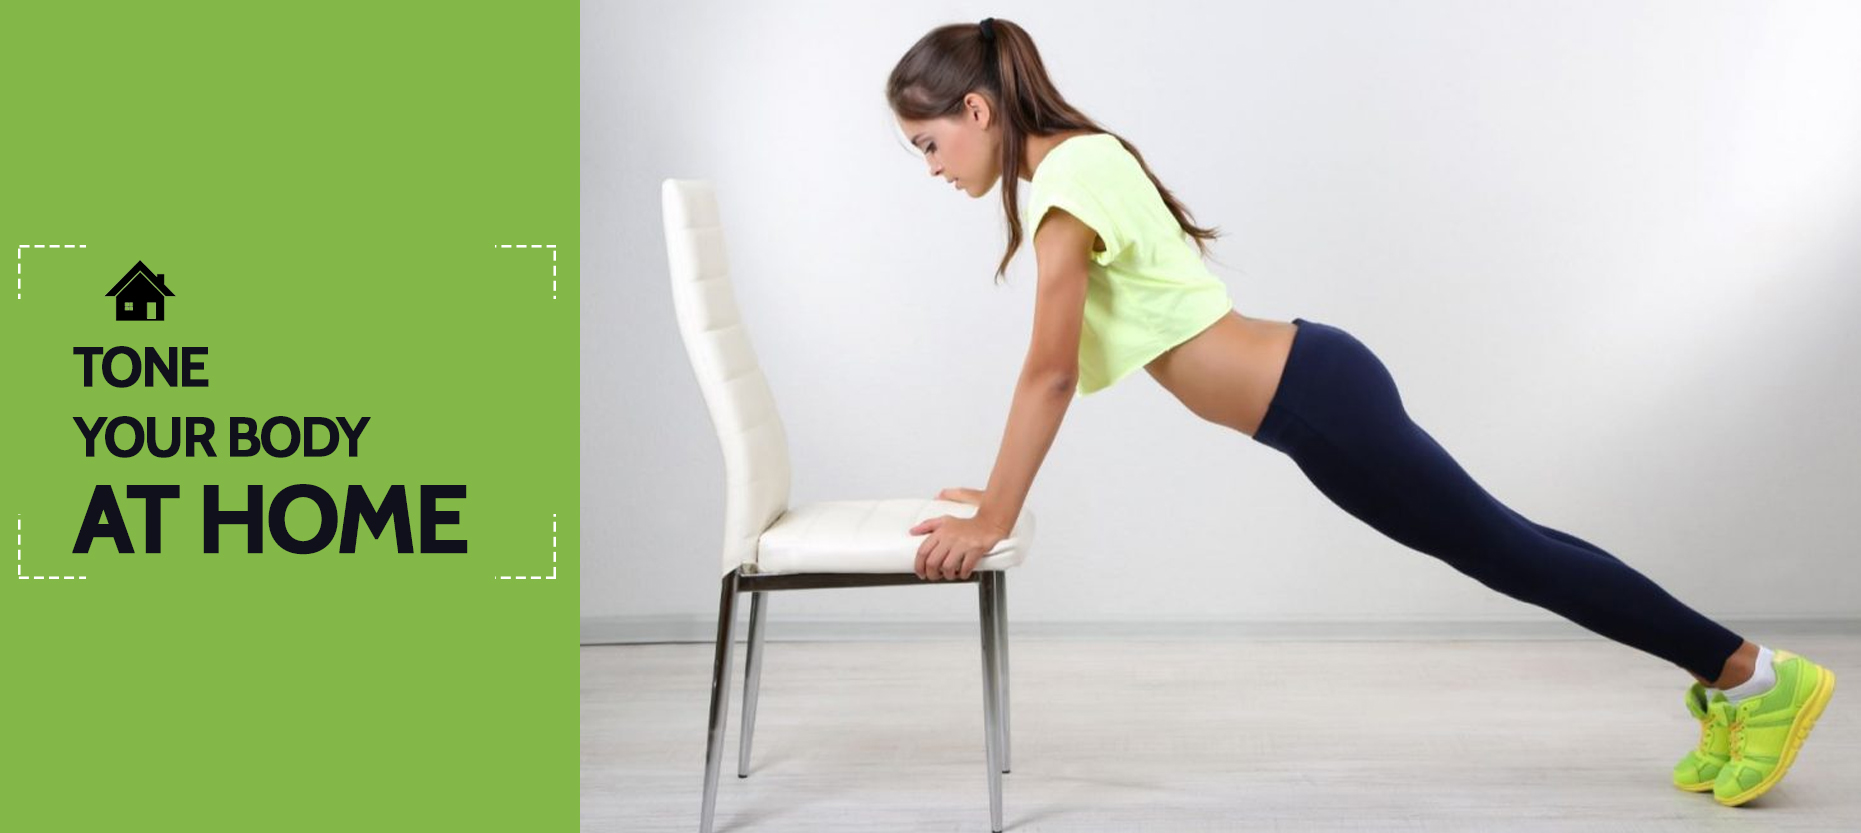 How to Tone Your Body at Home Without Equipment